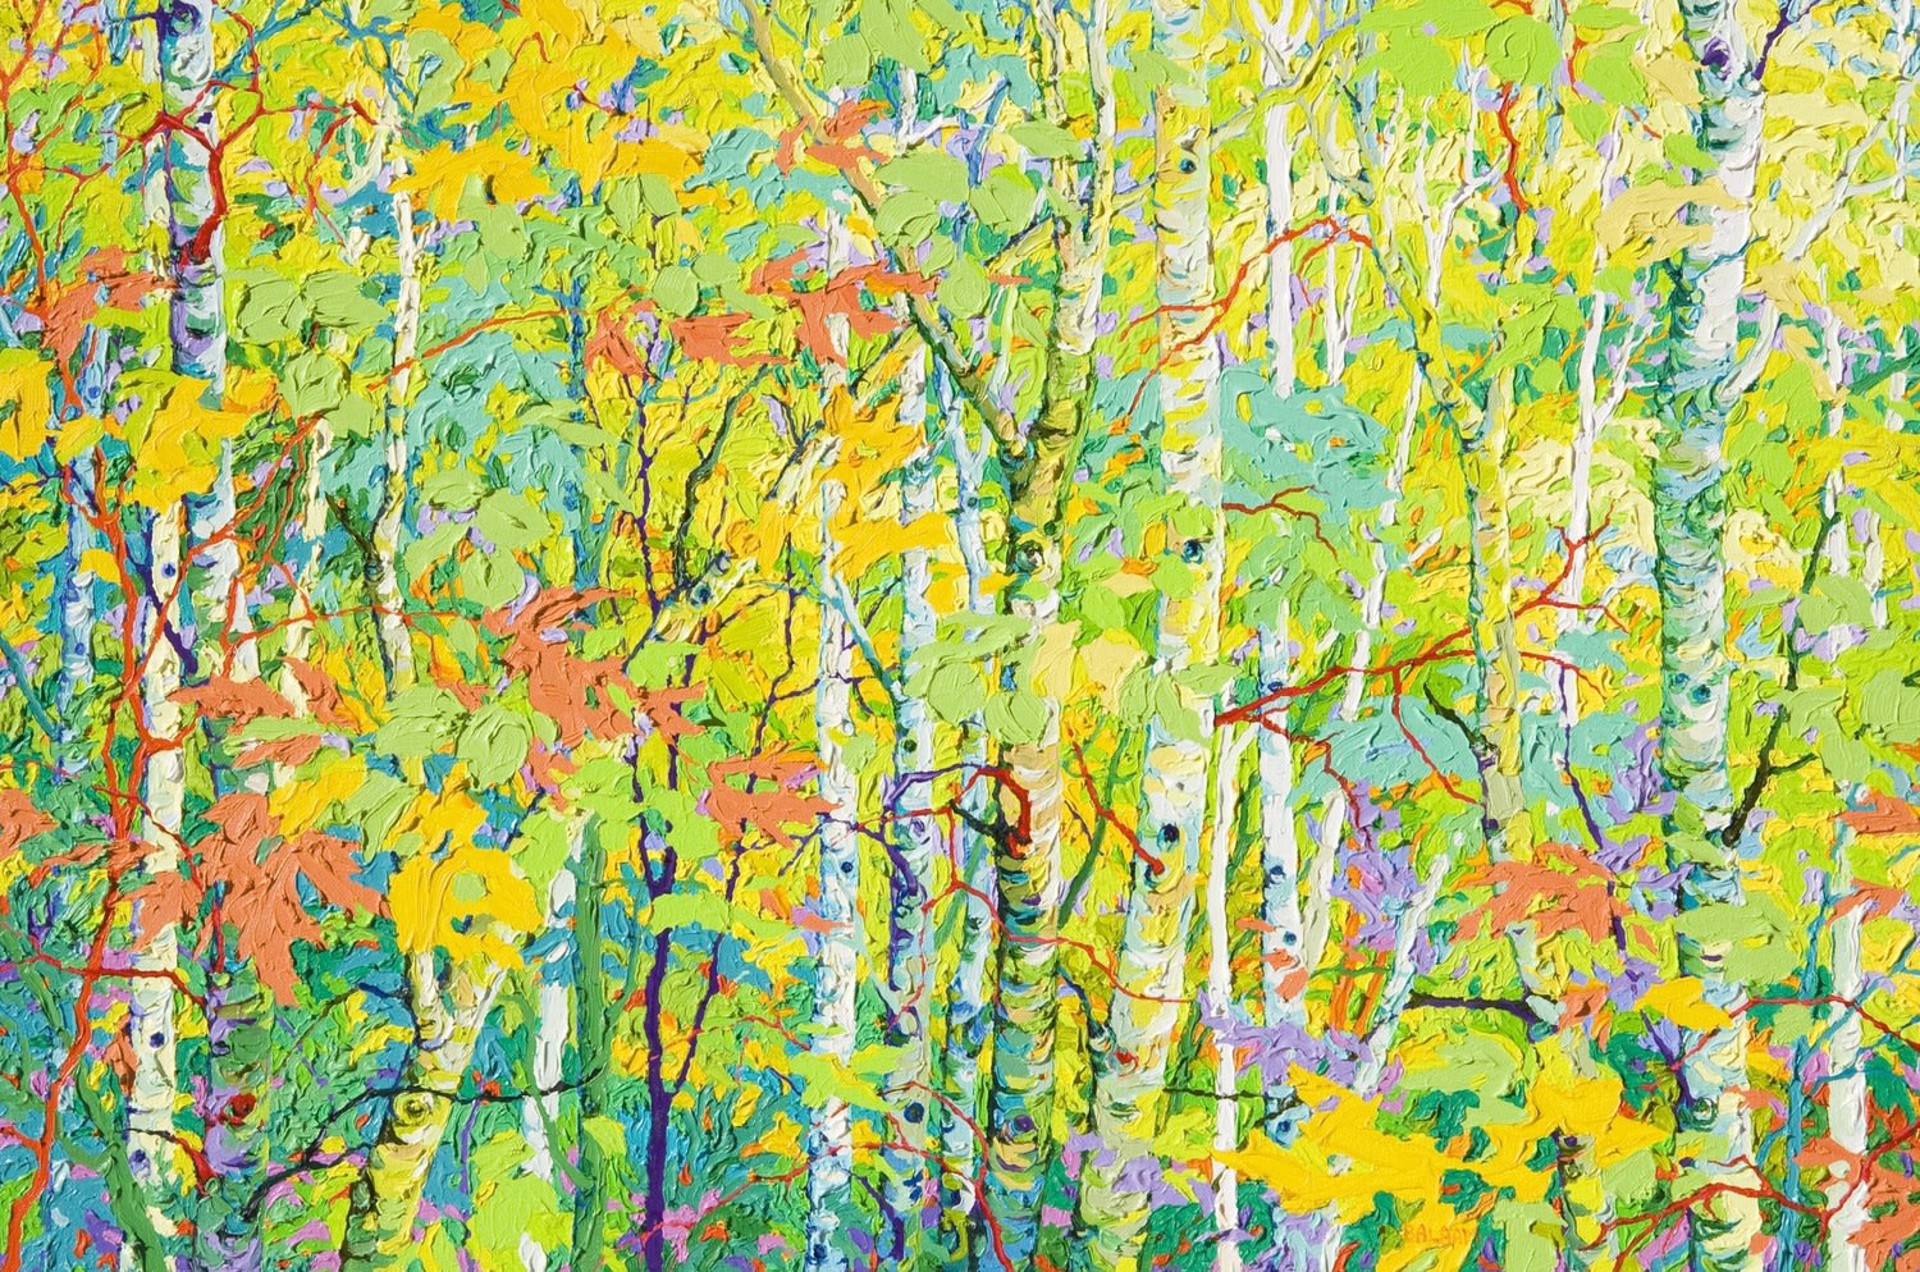 Aspens at the Violet Hour by Frank Balaam